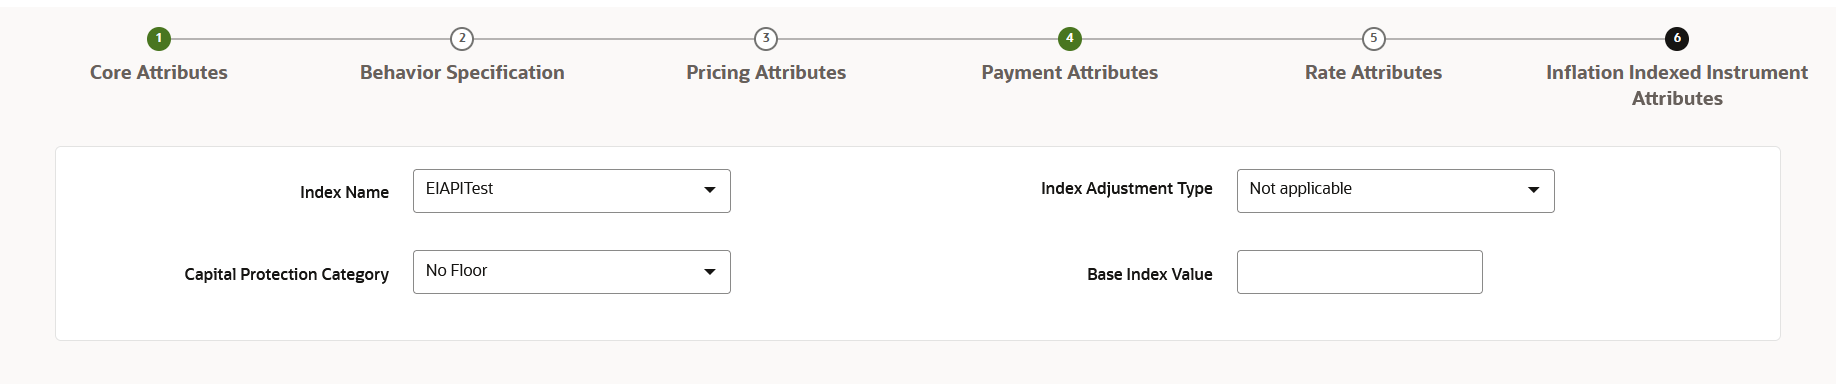 Inflation Adjustment Attributes section